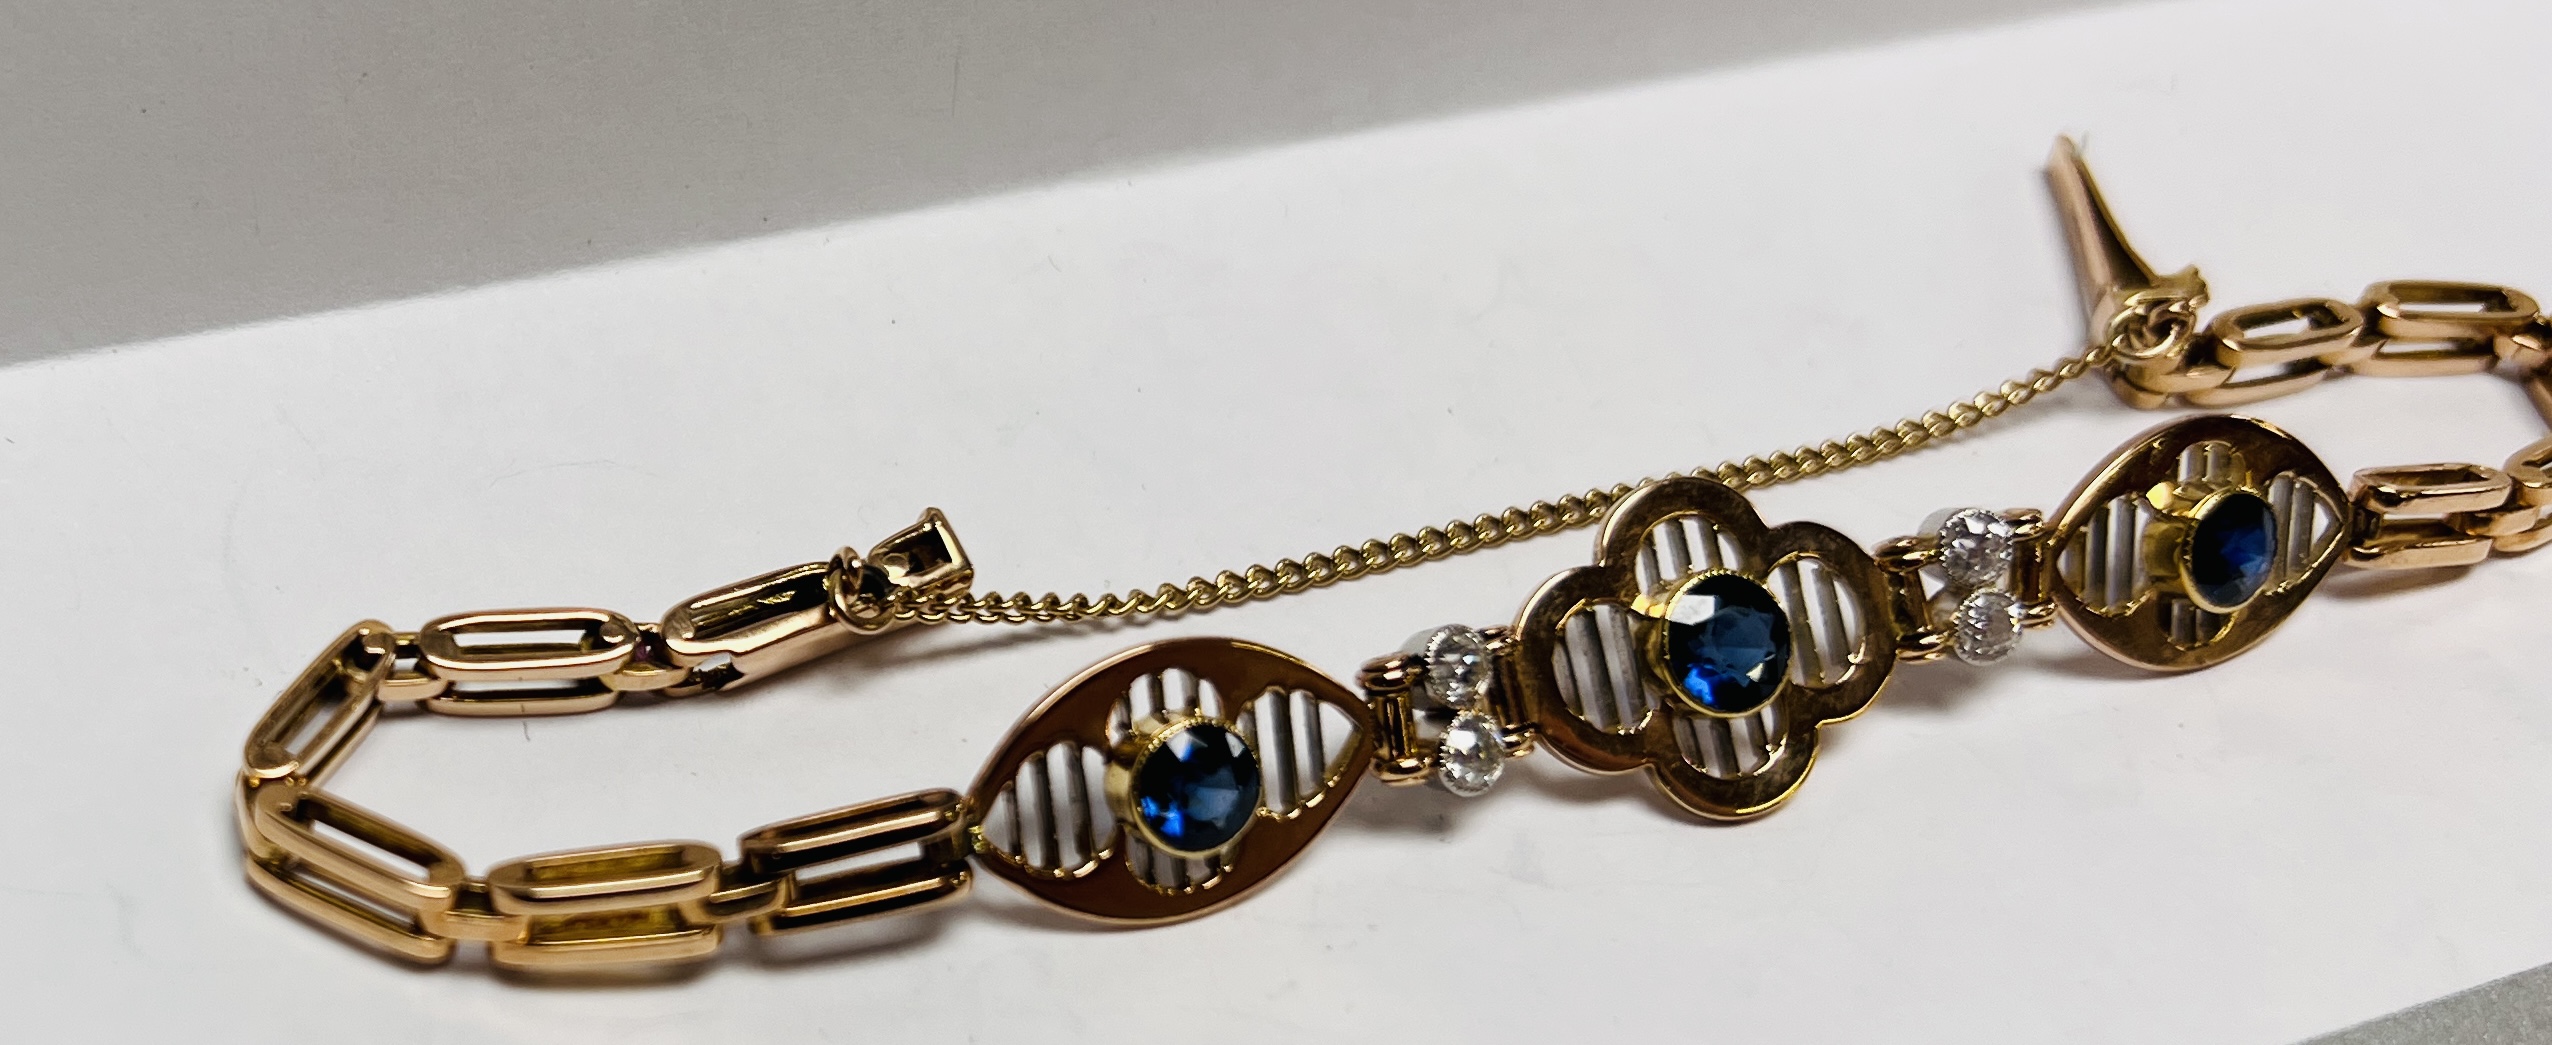 A VINTAGE DIAMOND AND SAPPHIRE BRACELET AND SAFETY CHAIN, - Image 6 of 8